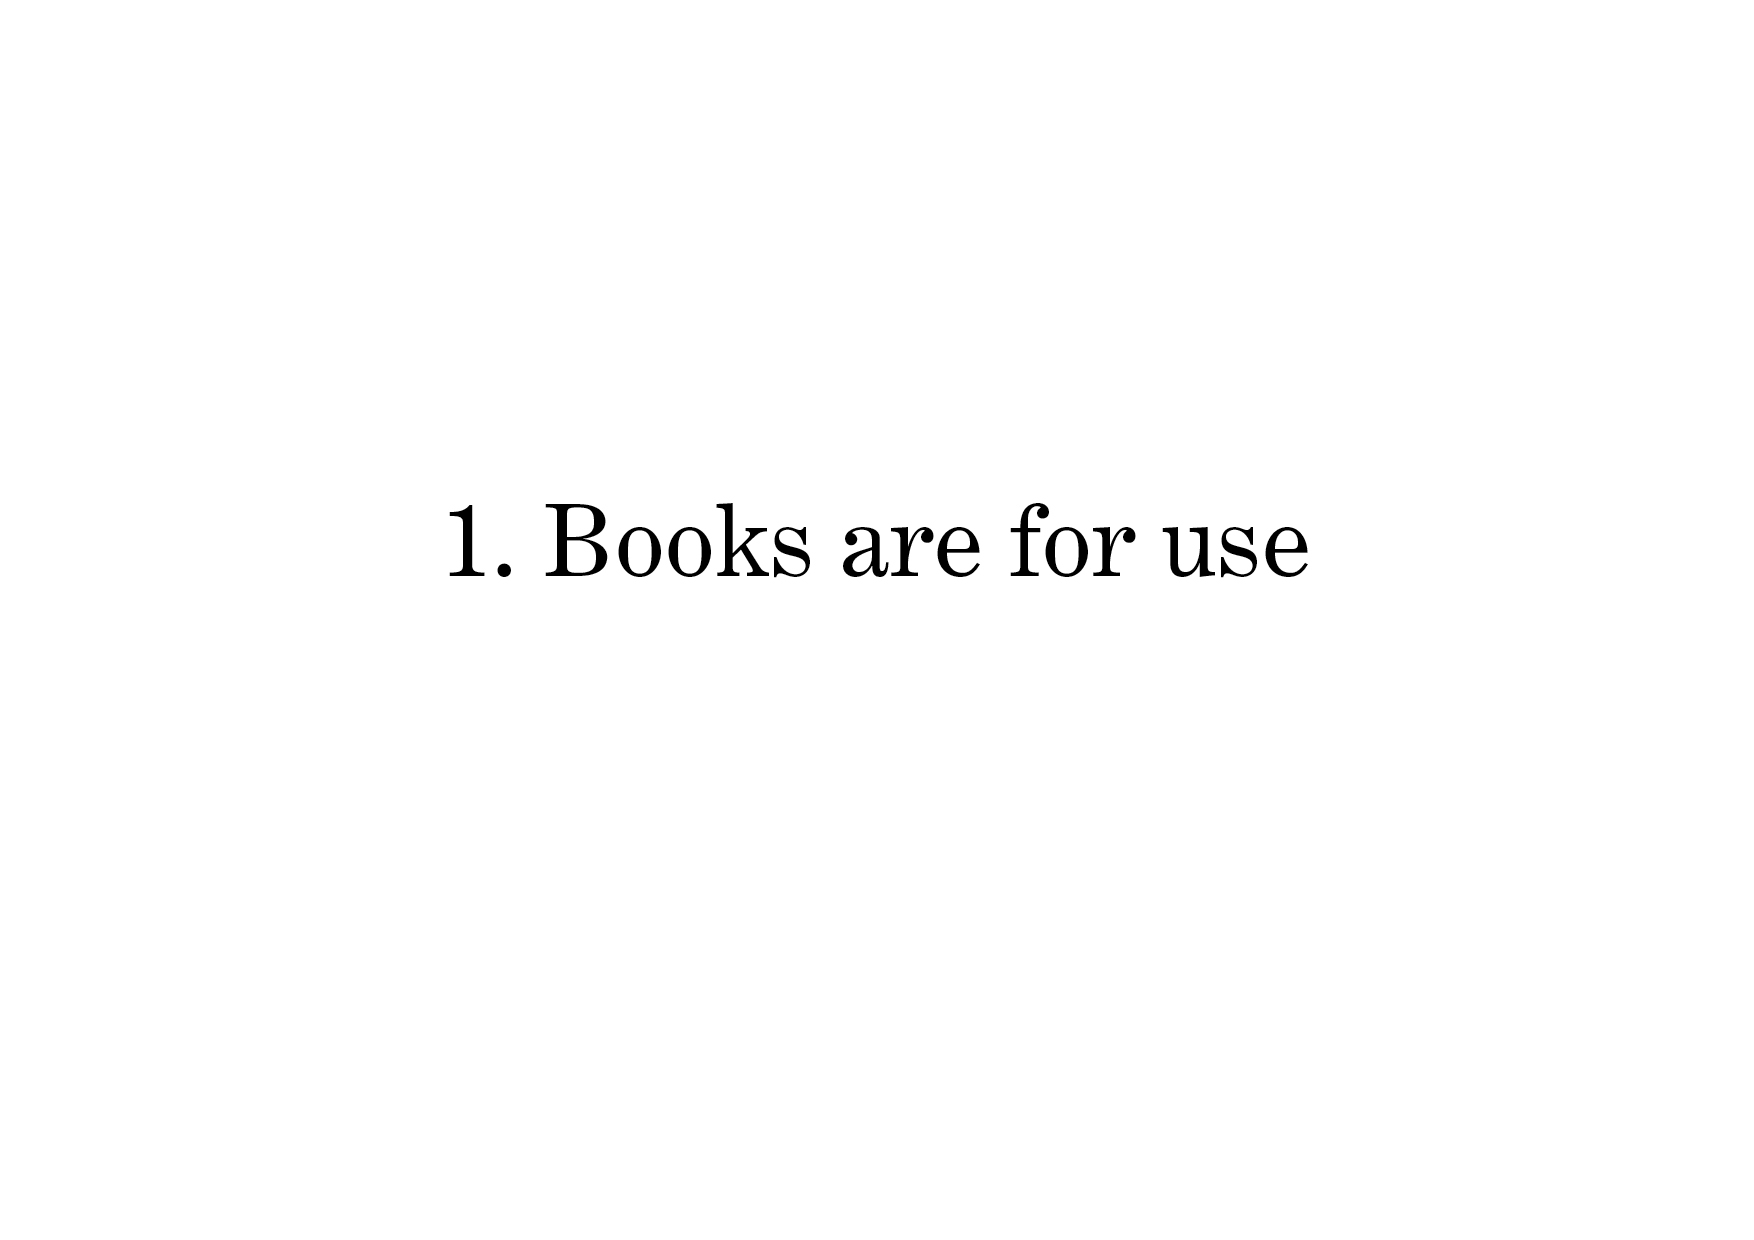 The first law of S. R. R. Rangathan’s “5 Laws of Library Science”, 1931